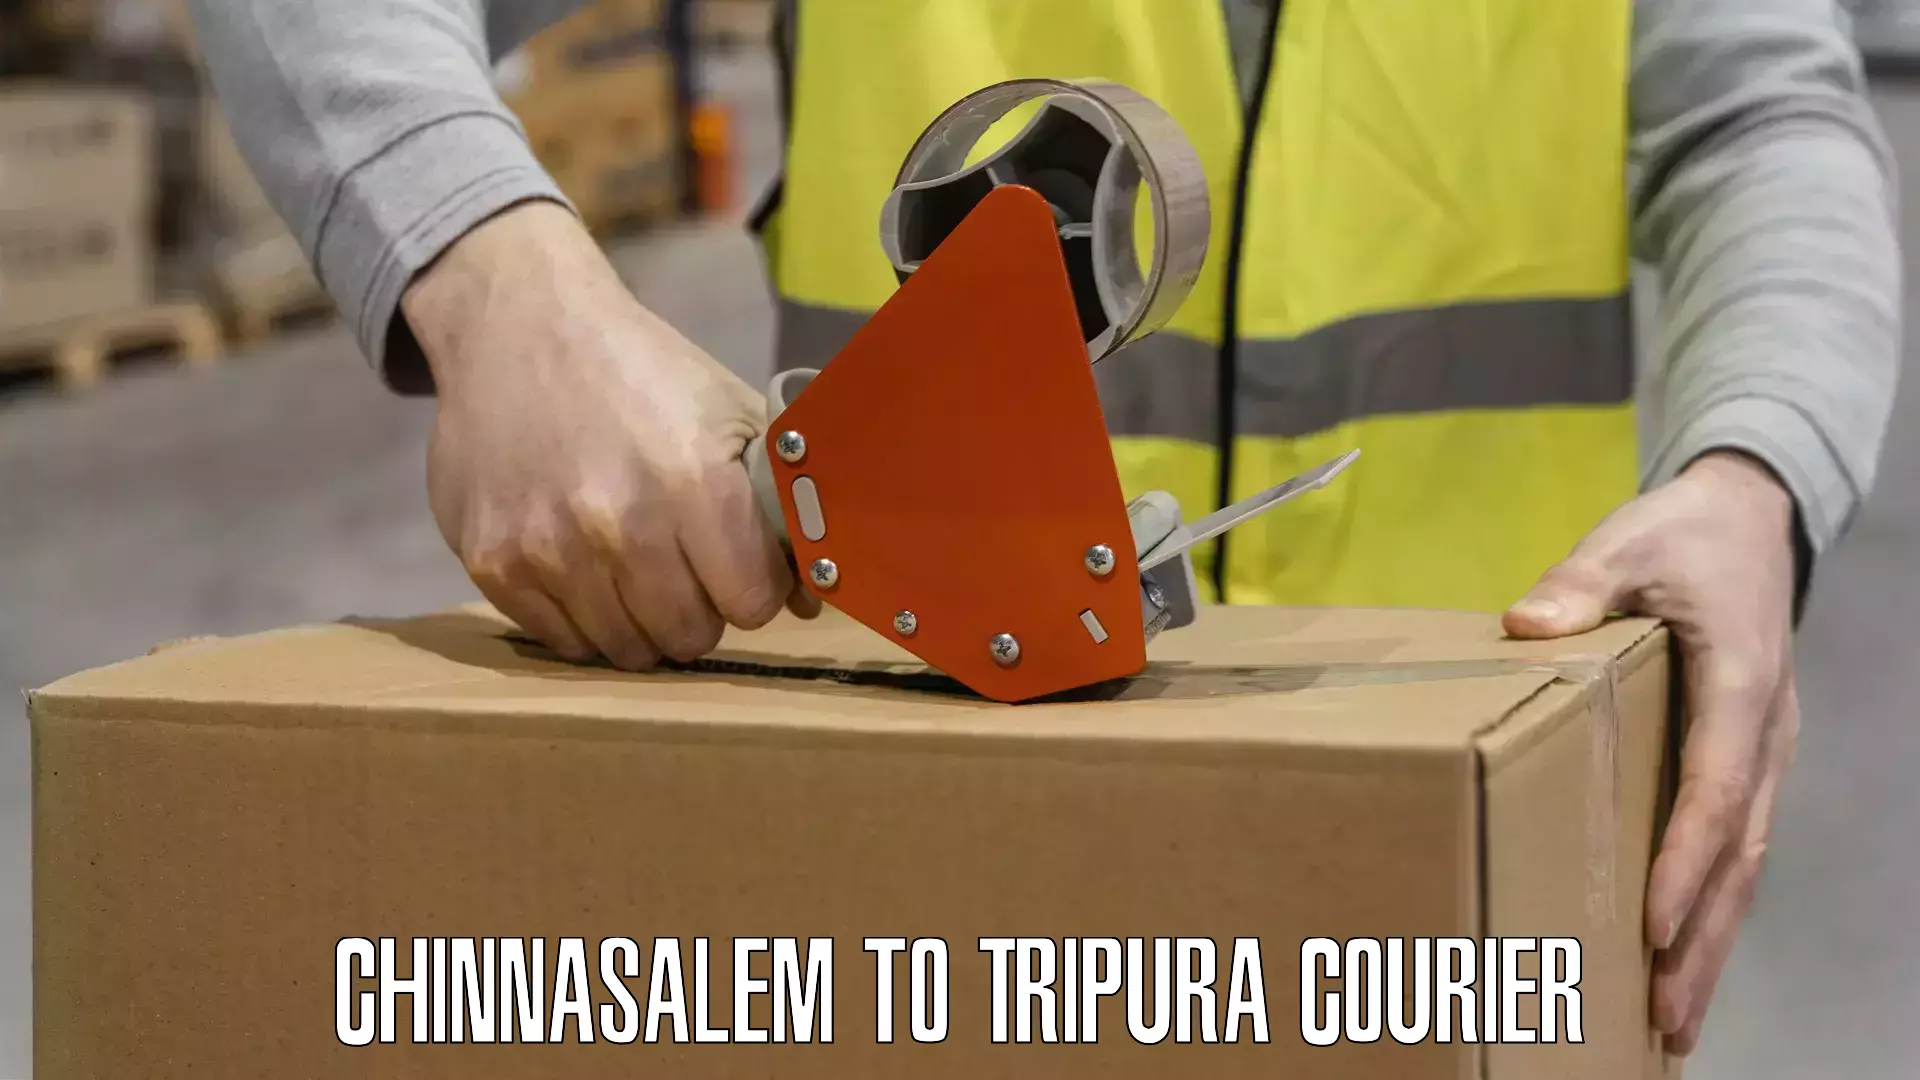 Easy access courier services Chinnasalem to Tripura